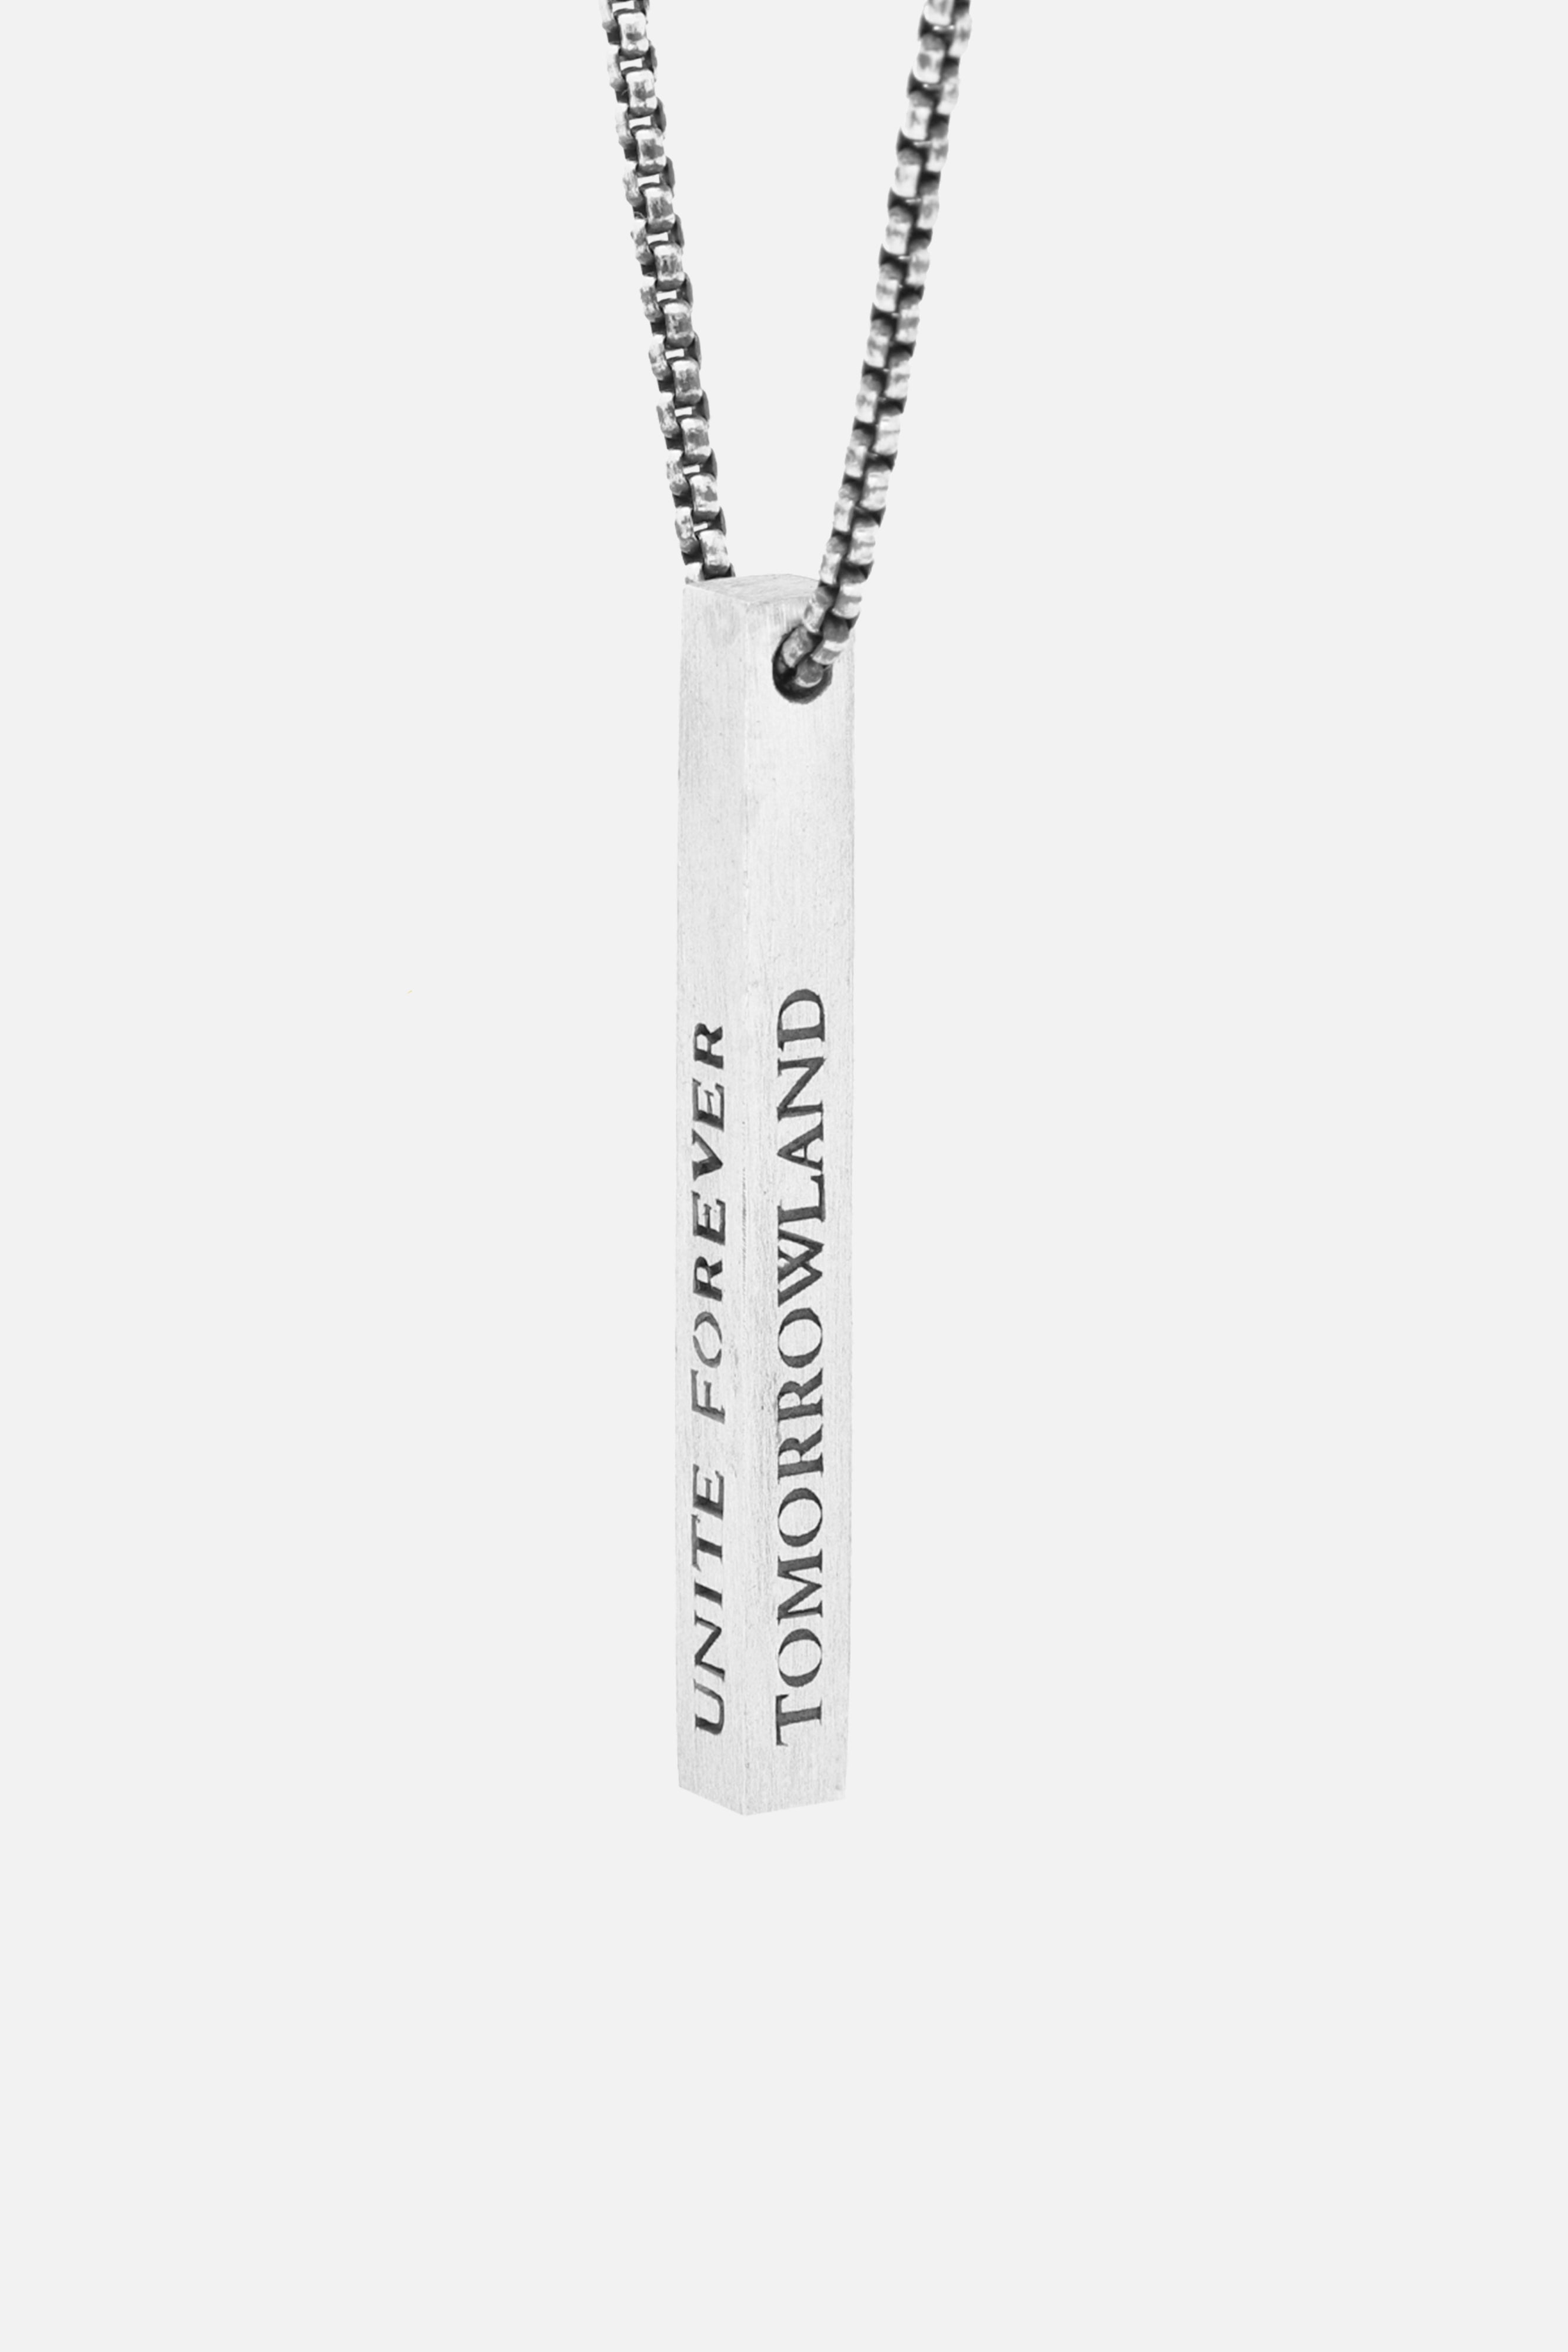 NECKLACES – Tomorrowland Store